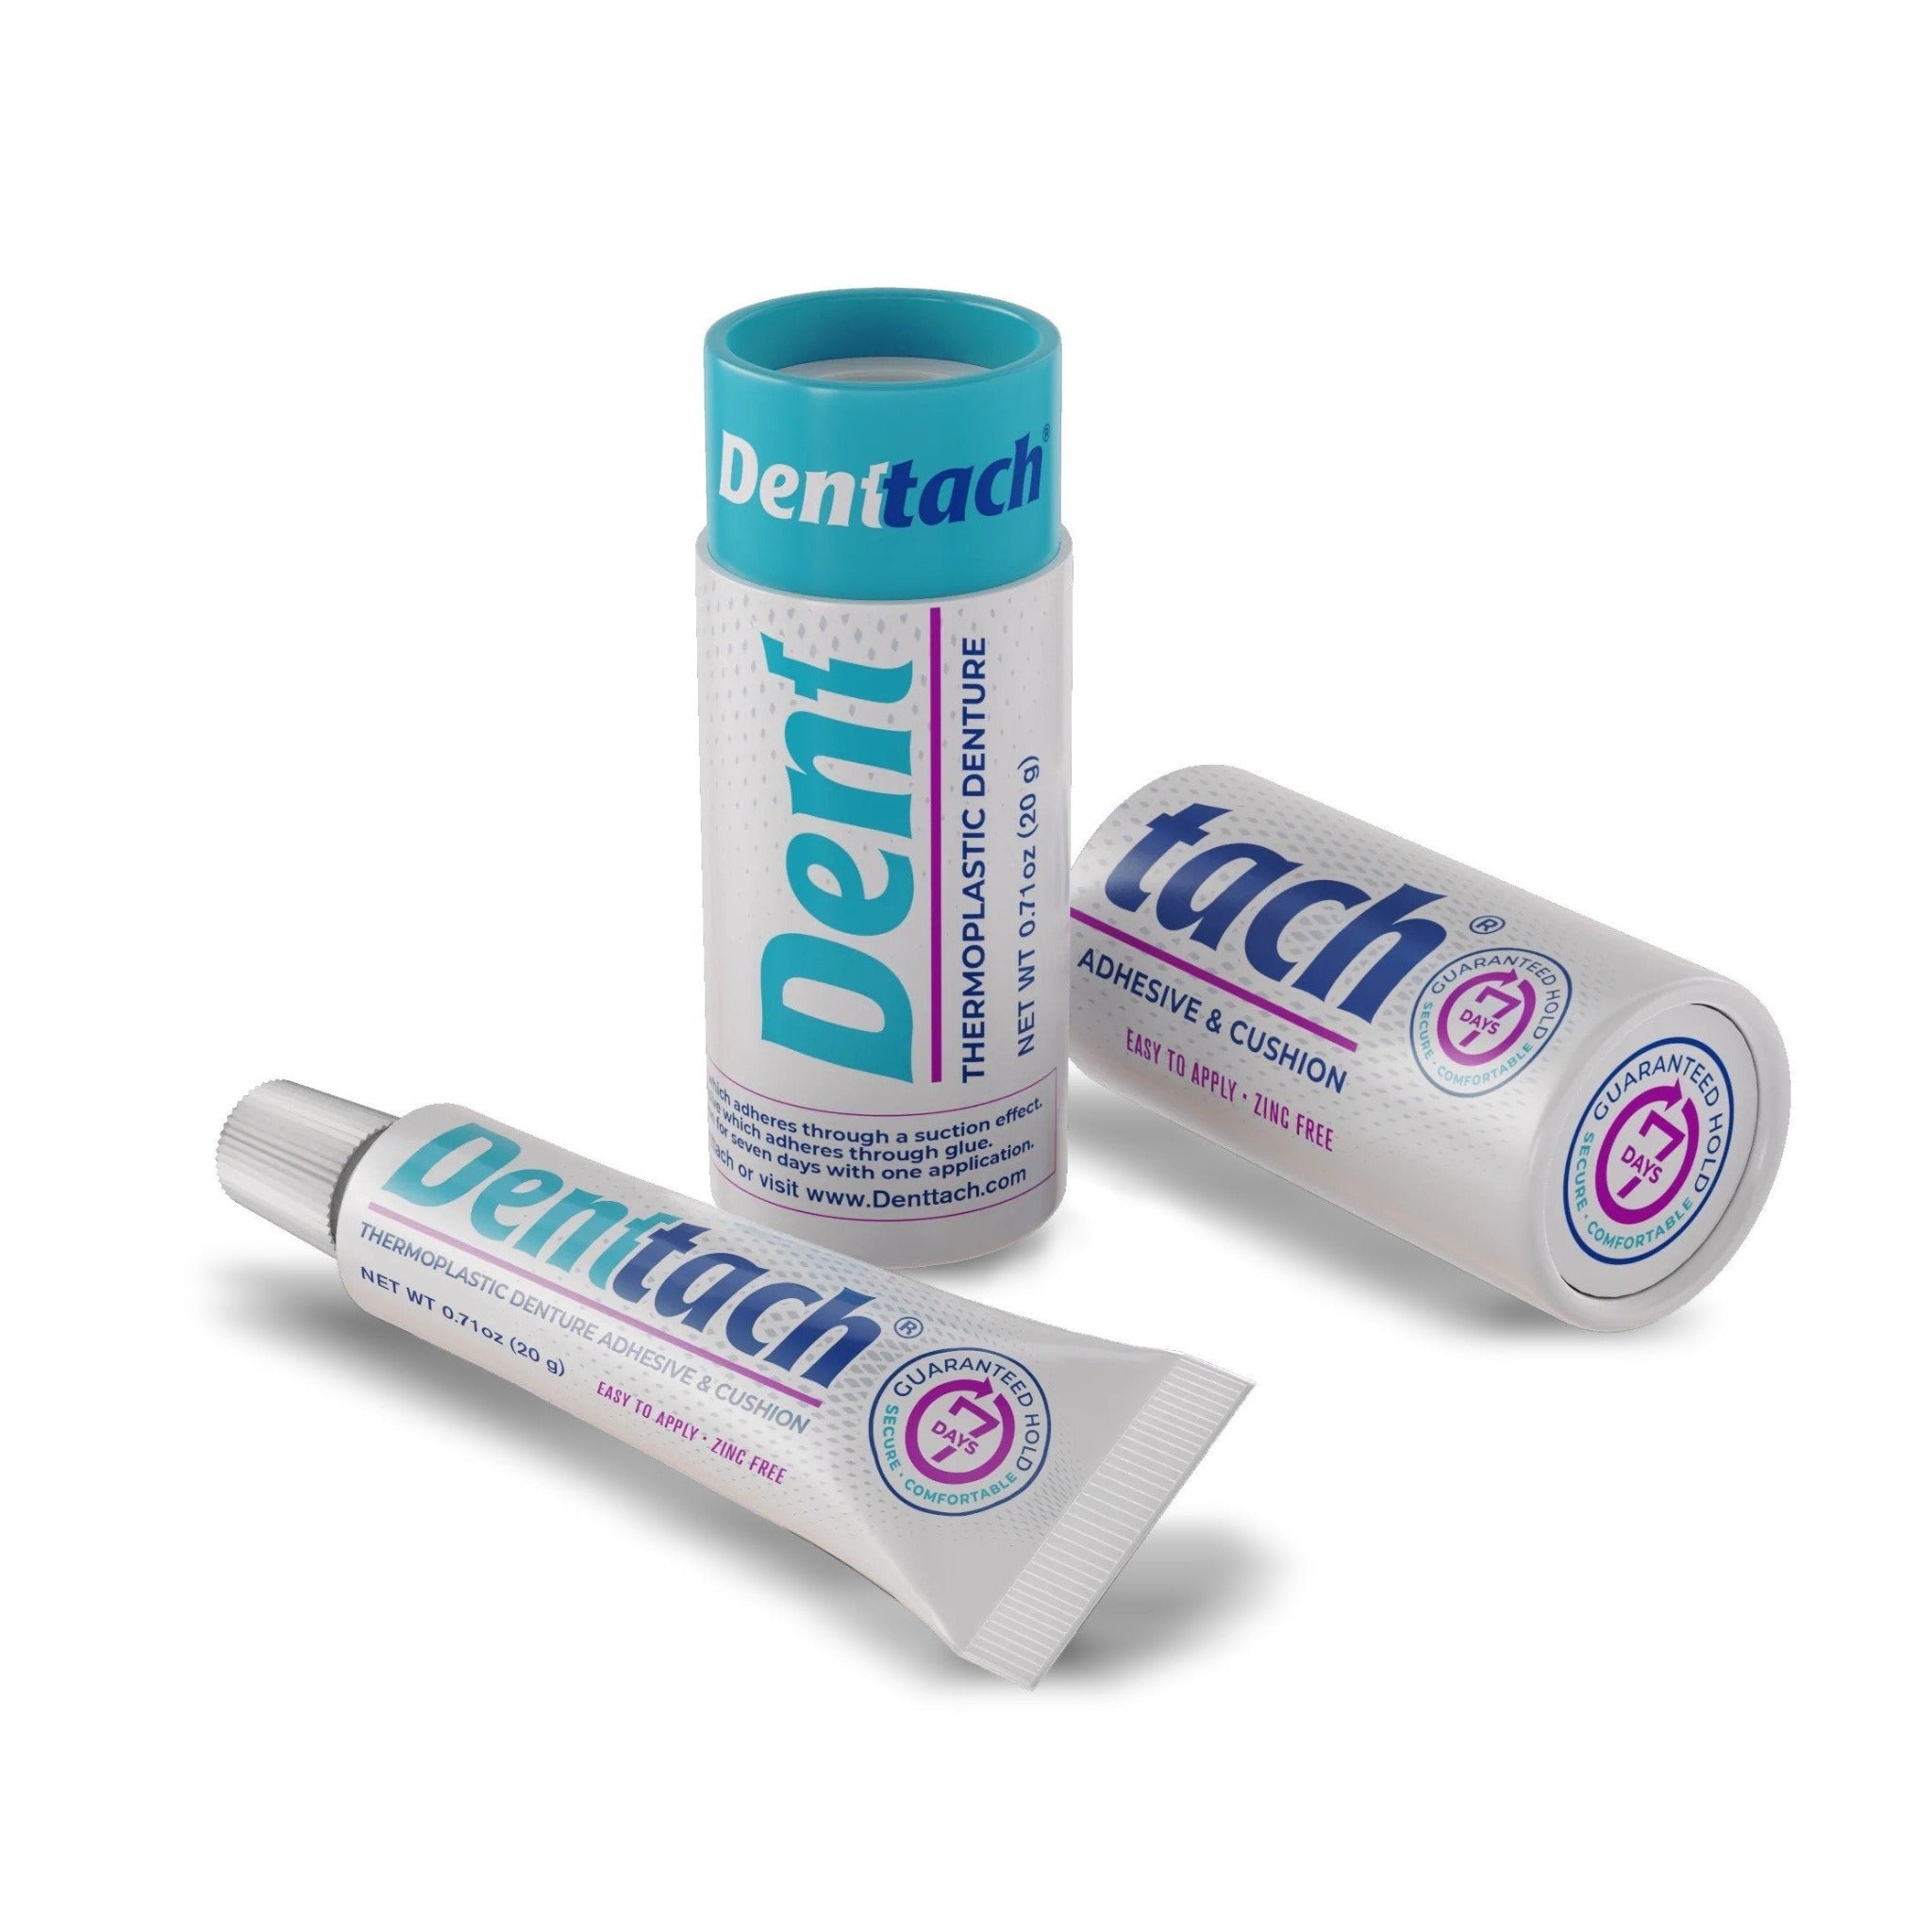 Denttach Thermoplastic Denture Adhesive and Cushion